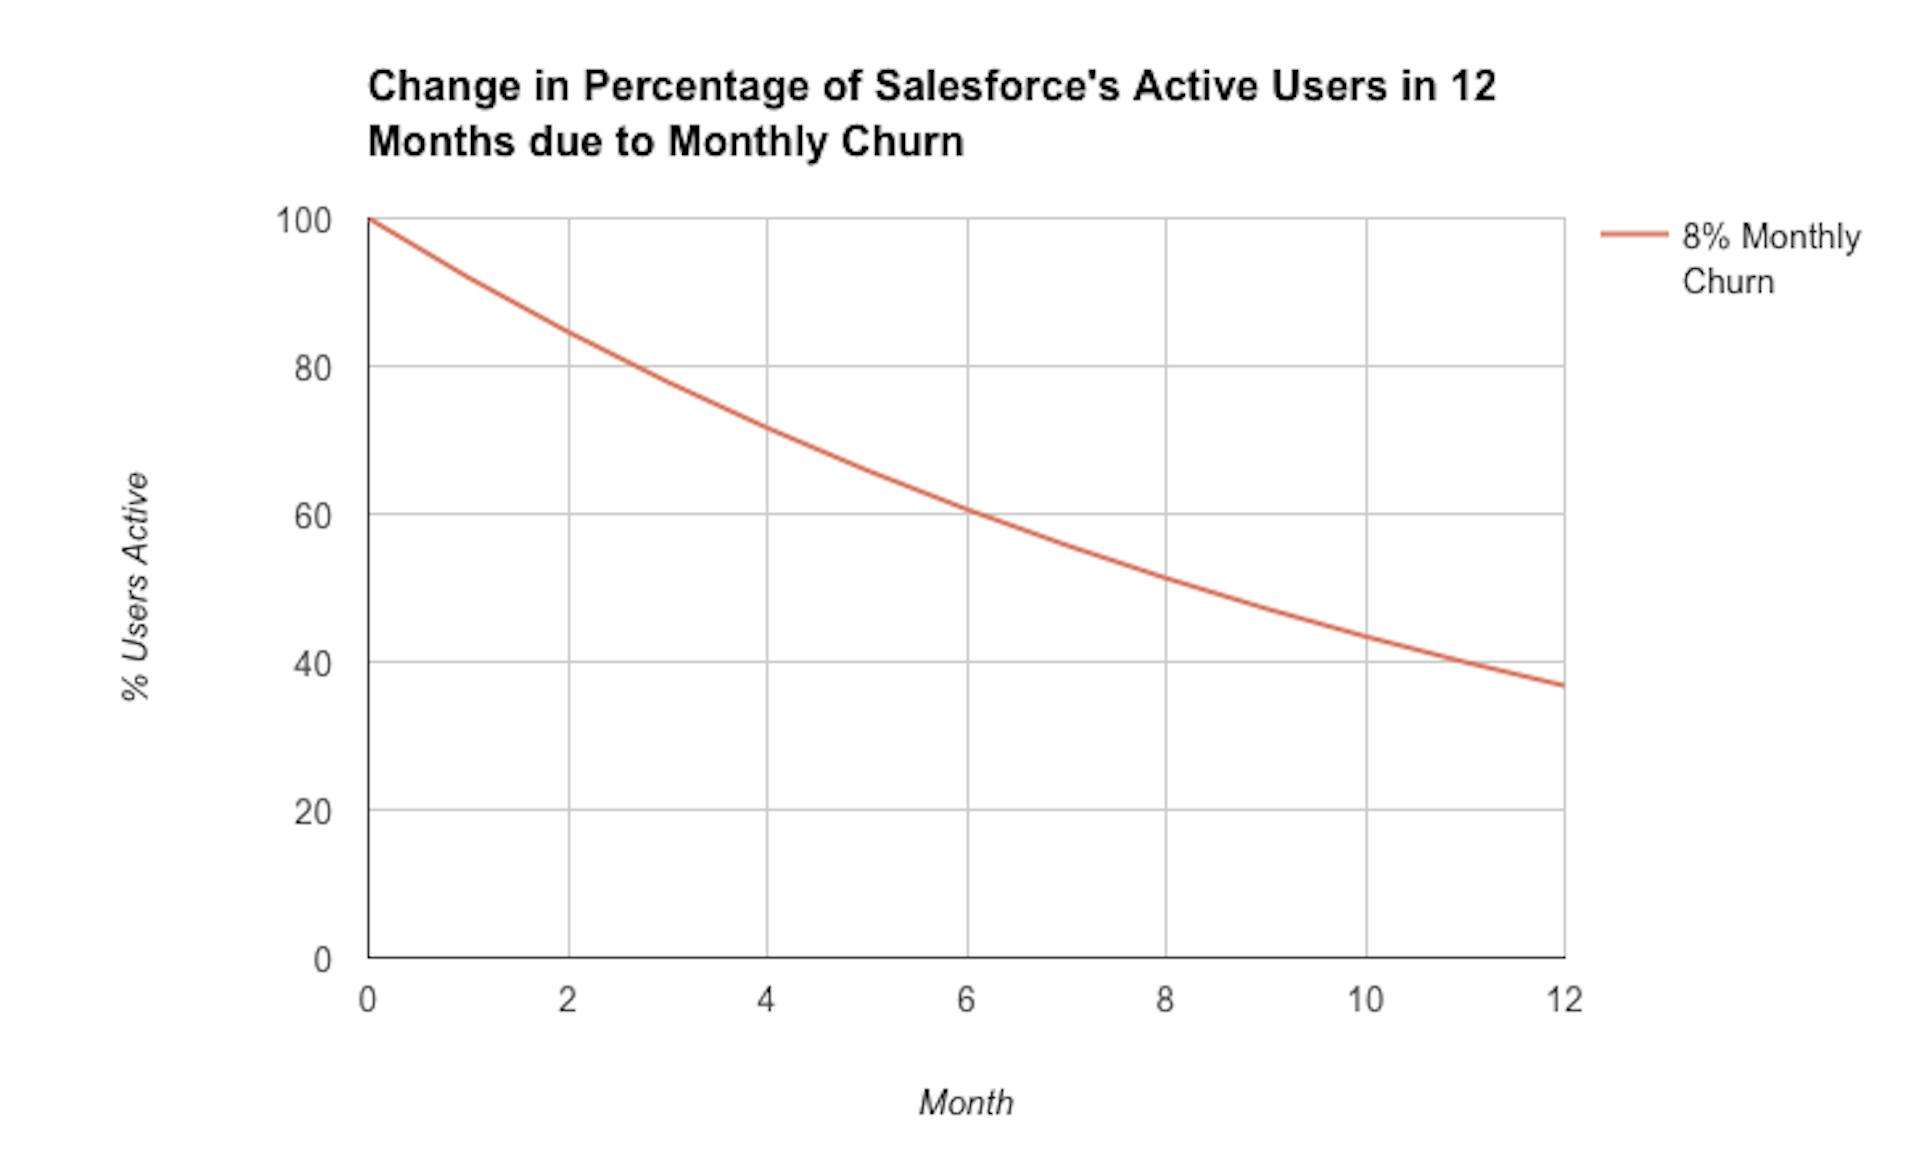 Chart shows change in percentage of Salesforce's active users in 12 months due to monthly churn at 8%. 100% active users reduces to less than 40% in 12 months